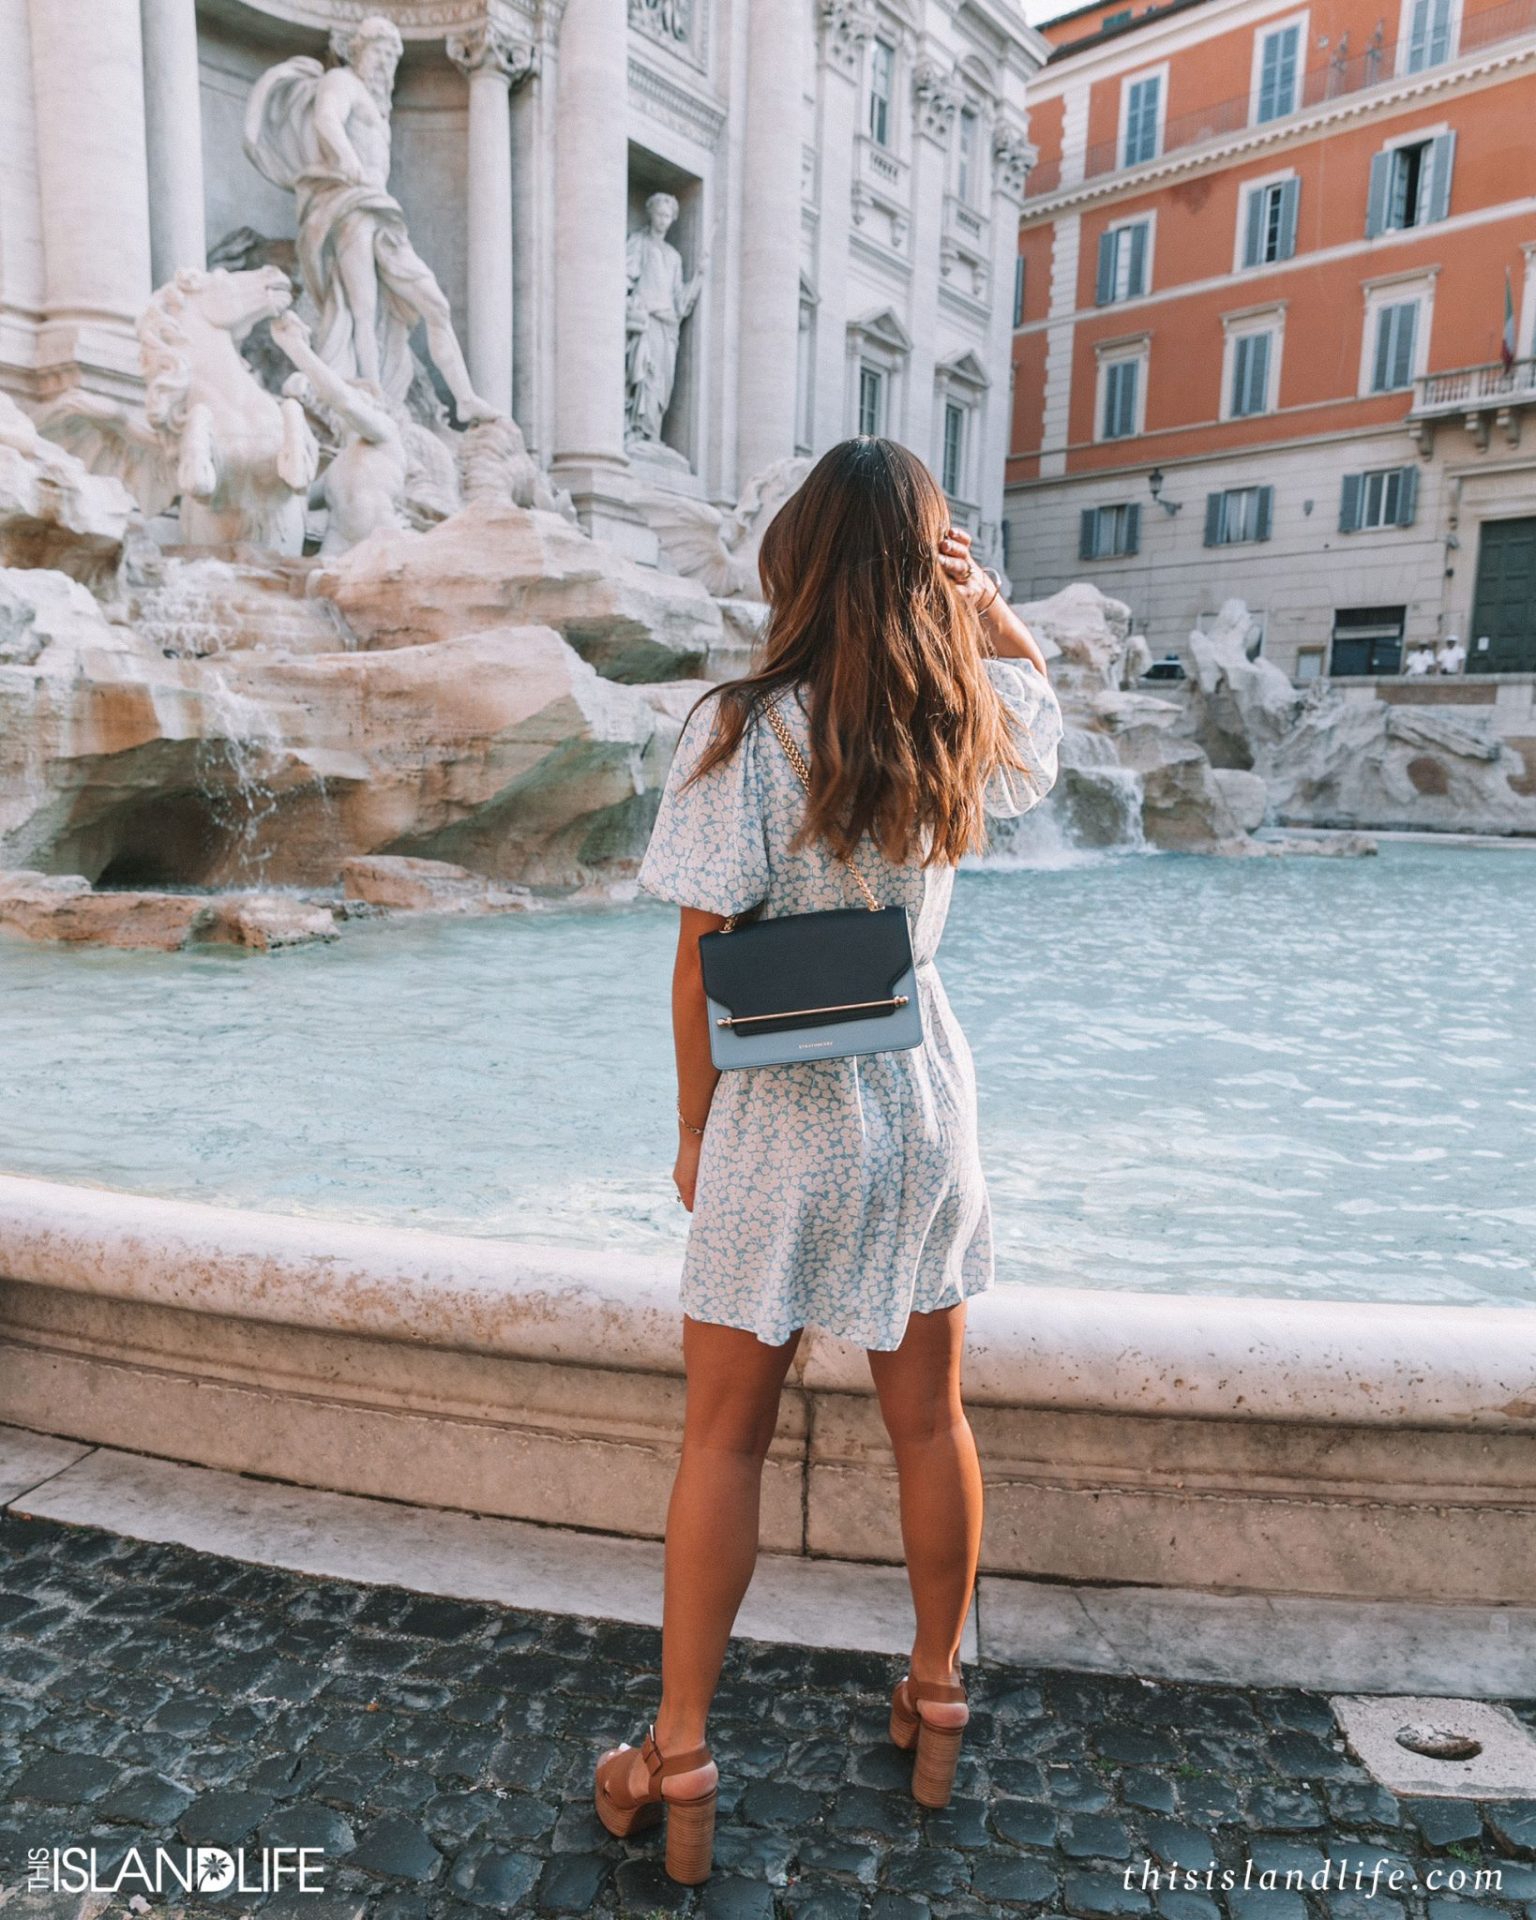 Girl sightseeing at Trevi Fountain in Rome